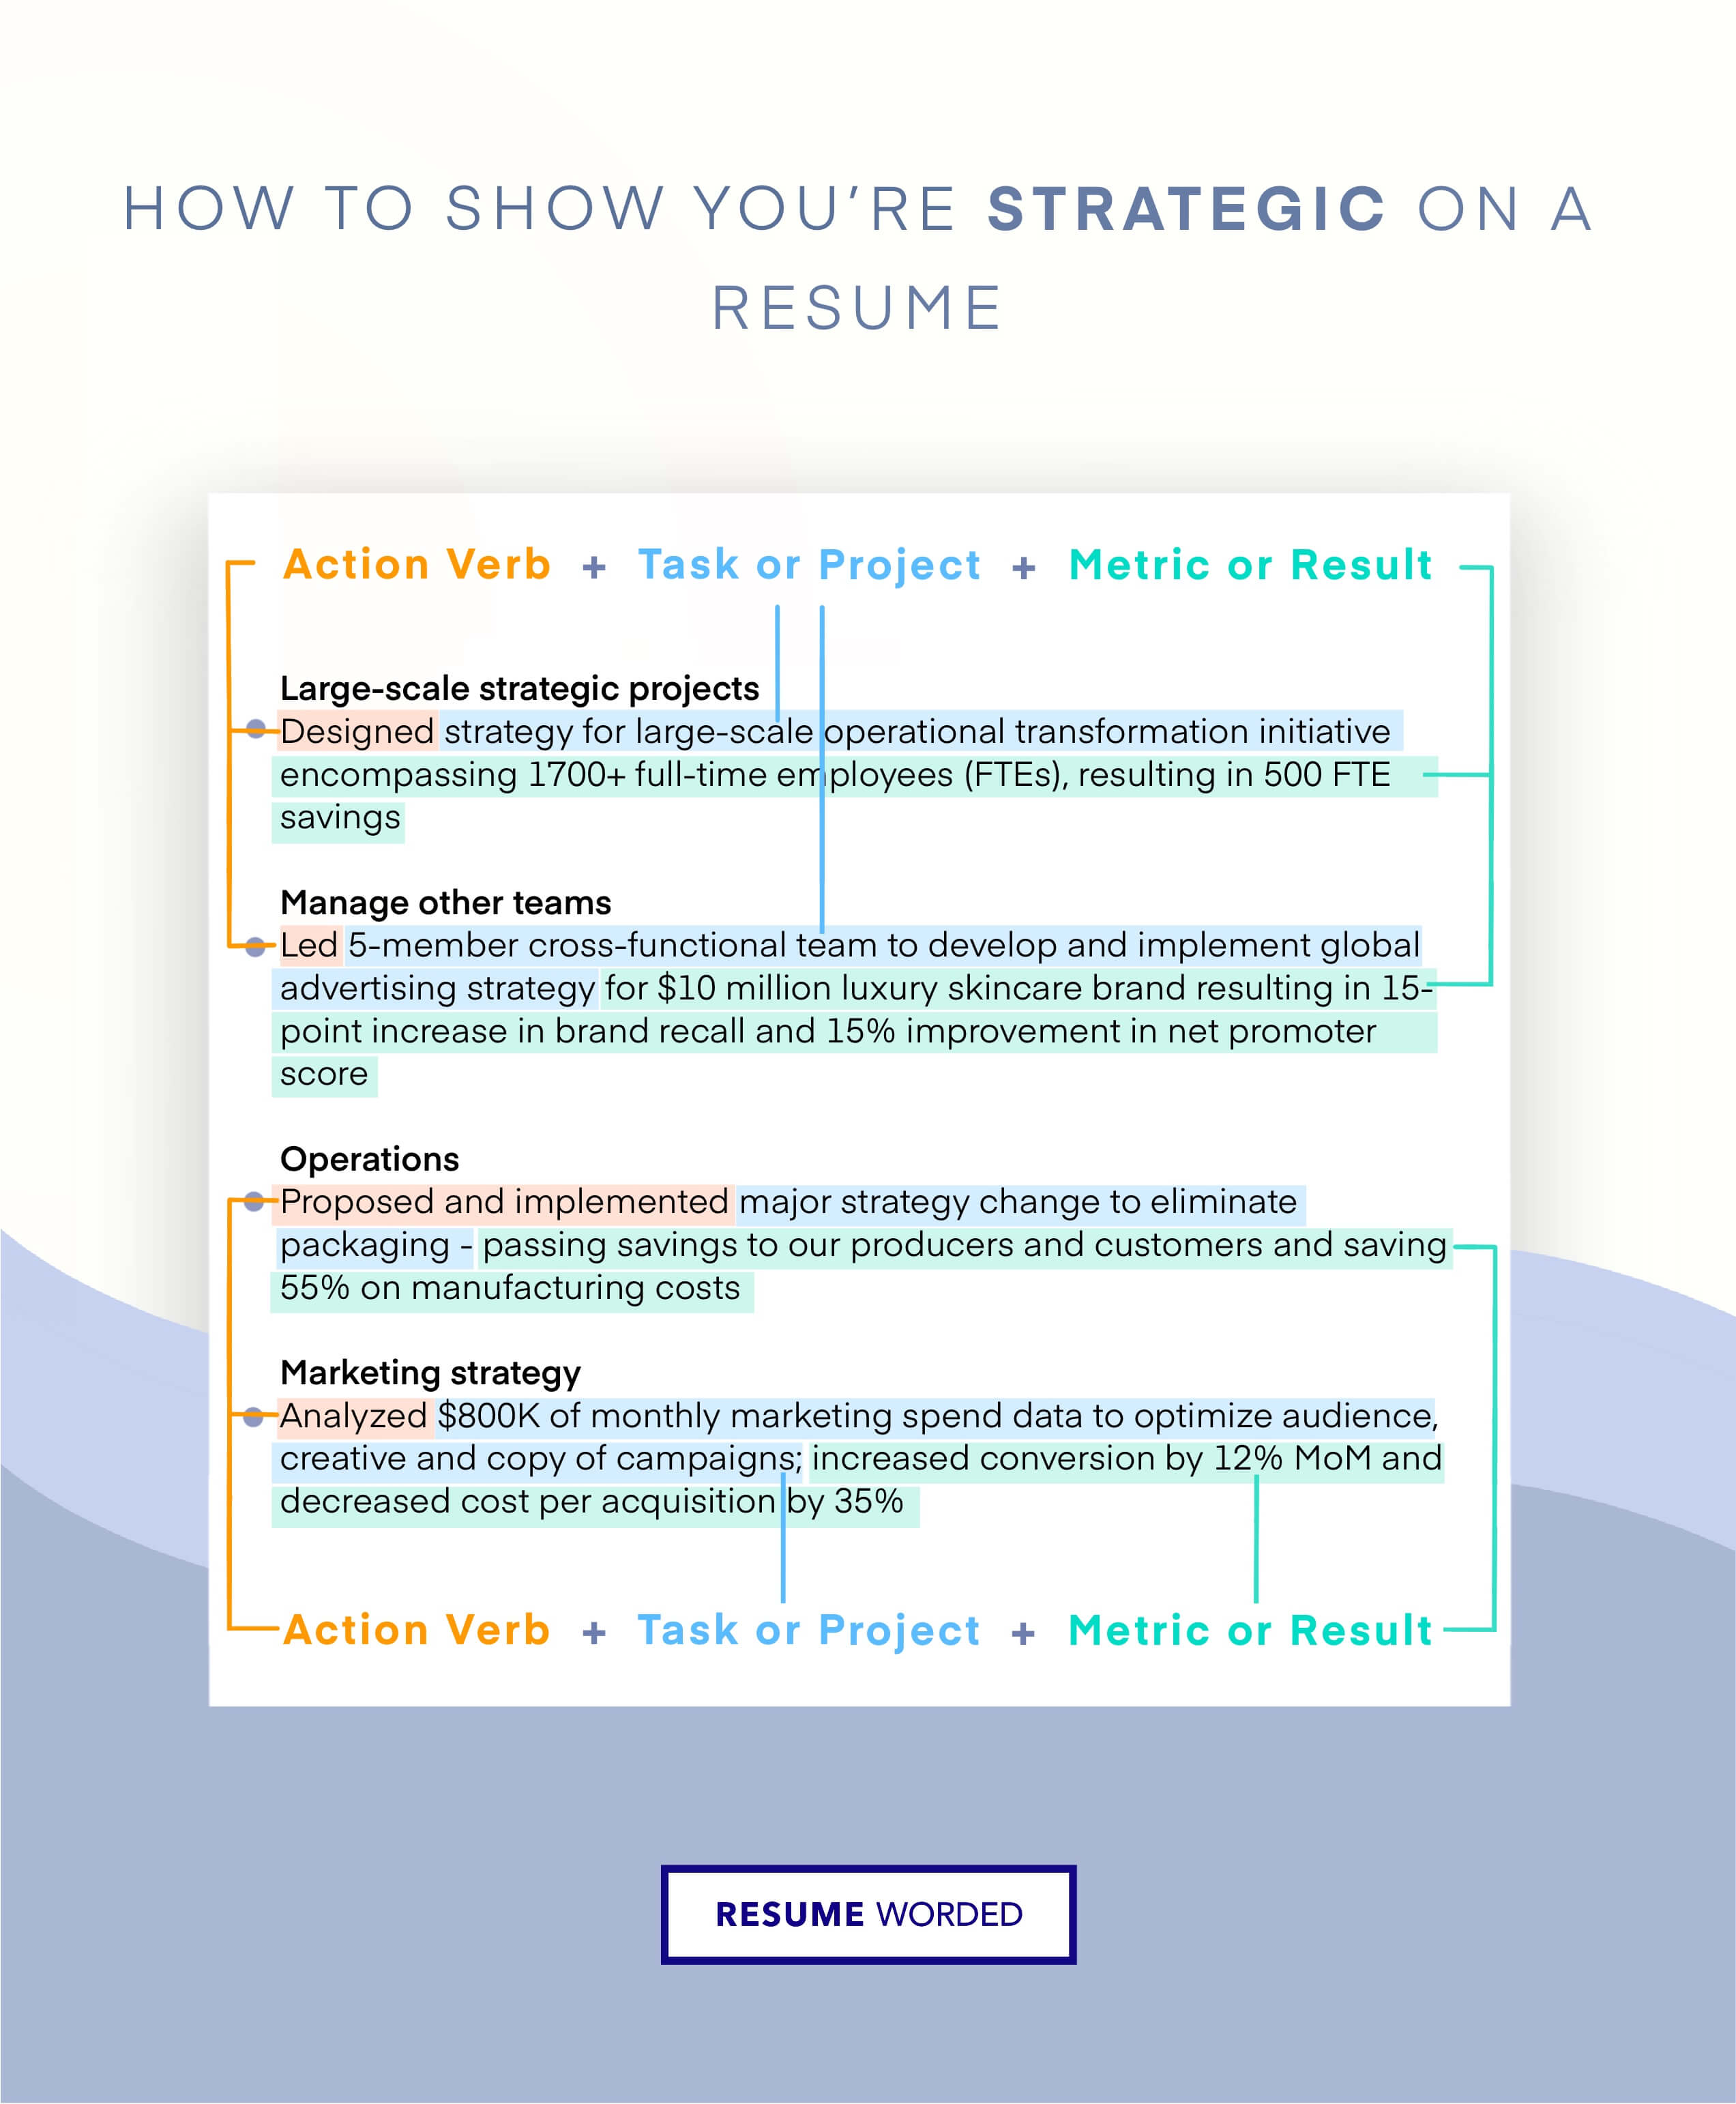 Highlight Your Strategic Initiatives - Director of Business Development Resume